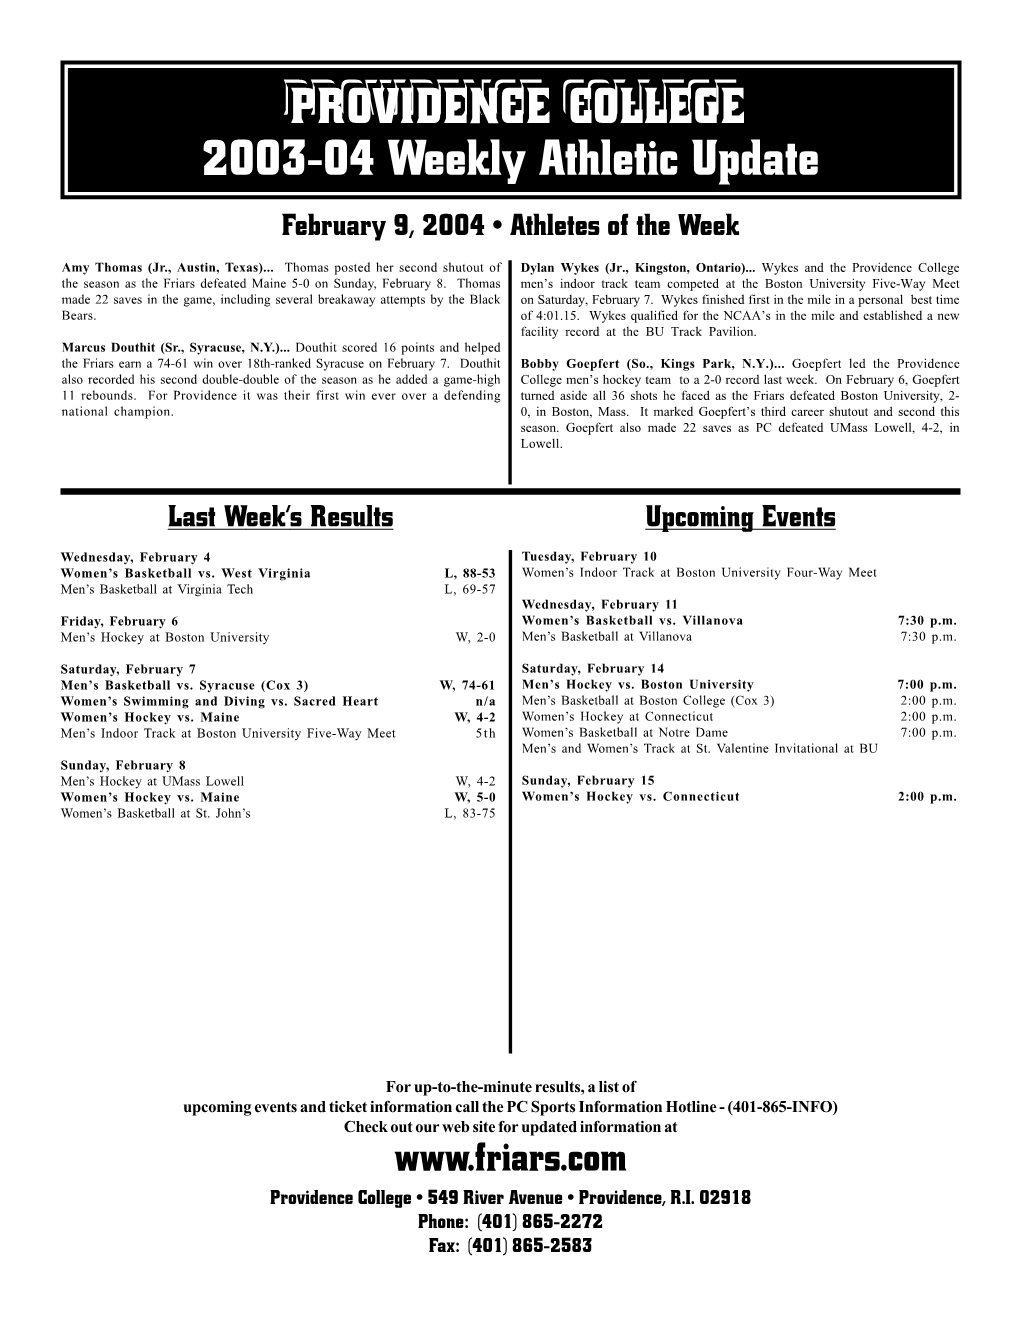 PROVIDENCE COLLEGE 2003-04 Weekly Athletic Update